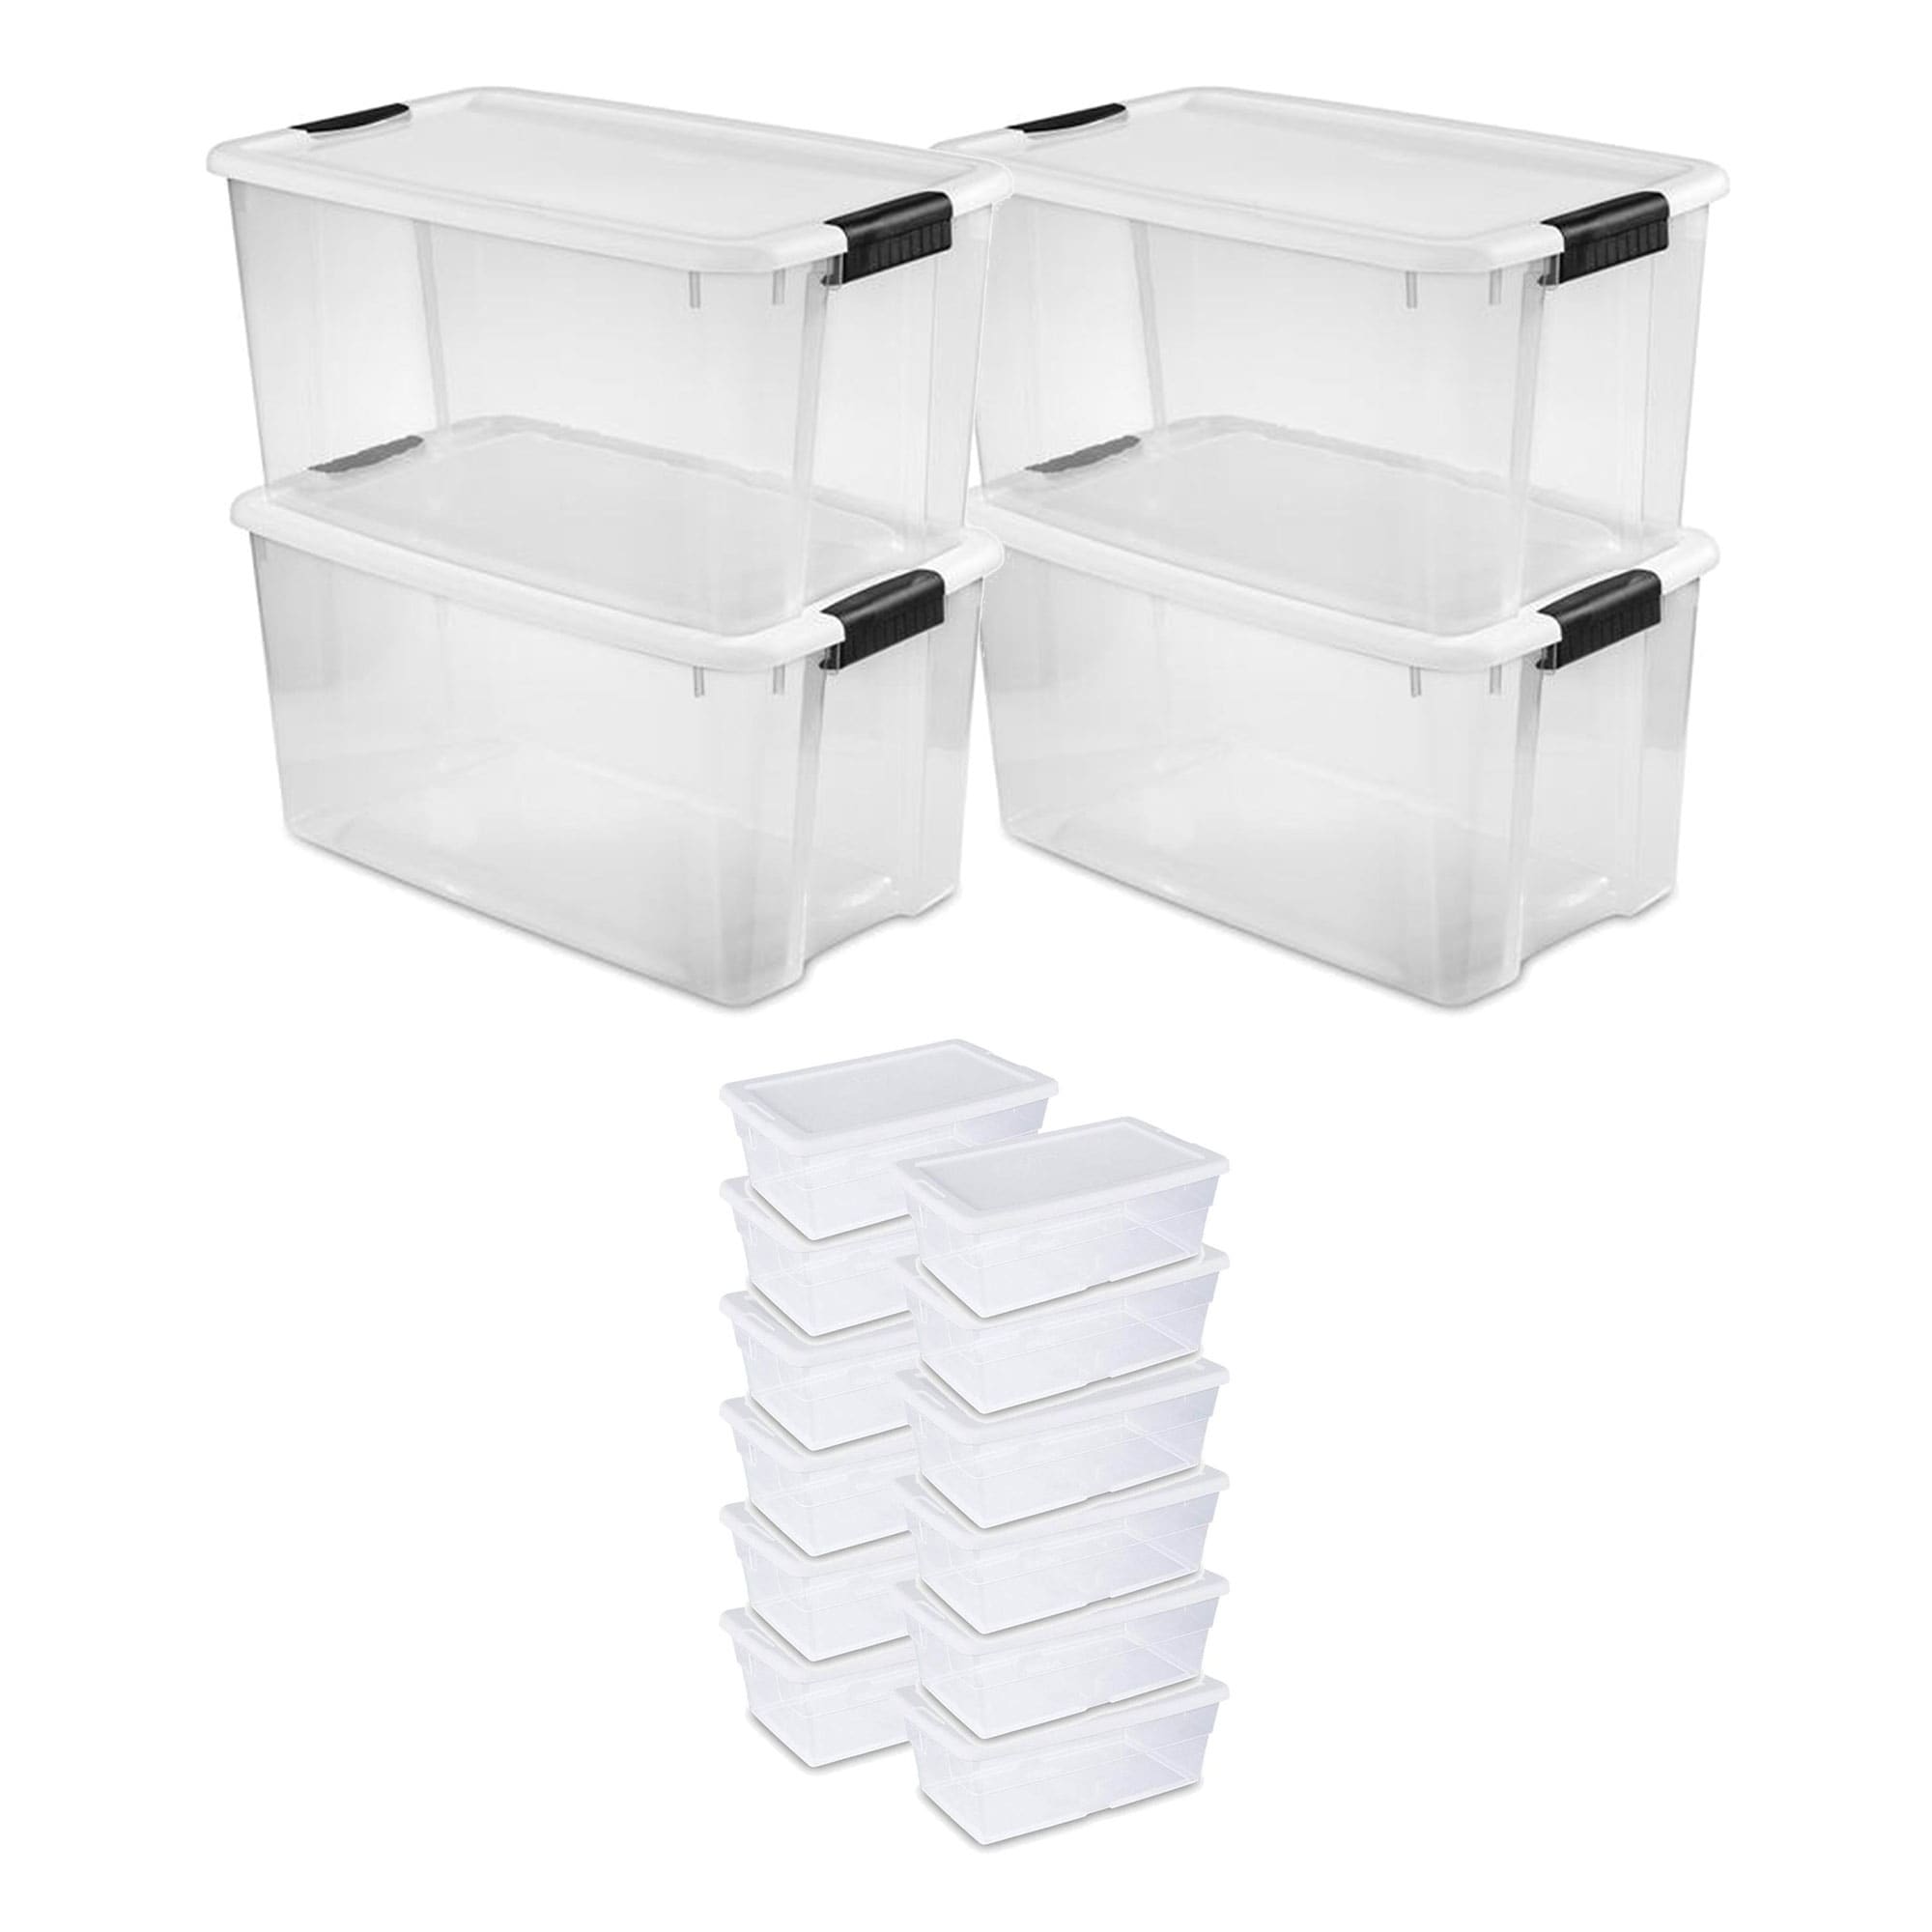 https://ak1.ostkcdn.com/images/products/is/images/direct/7130b87dea2b84f51be1348b325acf1ce3ca9f03/Sterilite-70-Quart-Ultra-Storage-Container-Box-%284-Pack%29-%26-6-Quart-Tote-%2812-Pack%29.jpg